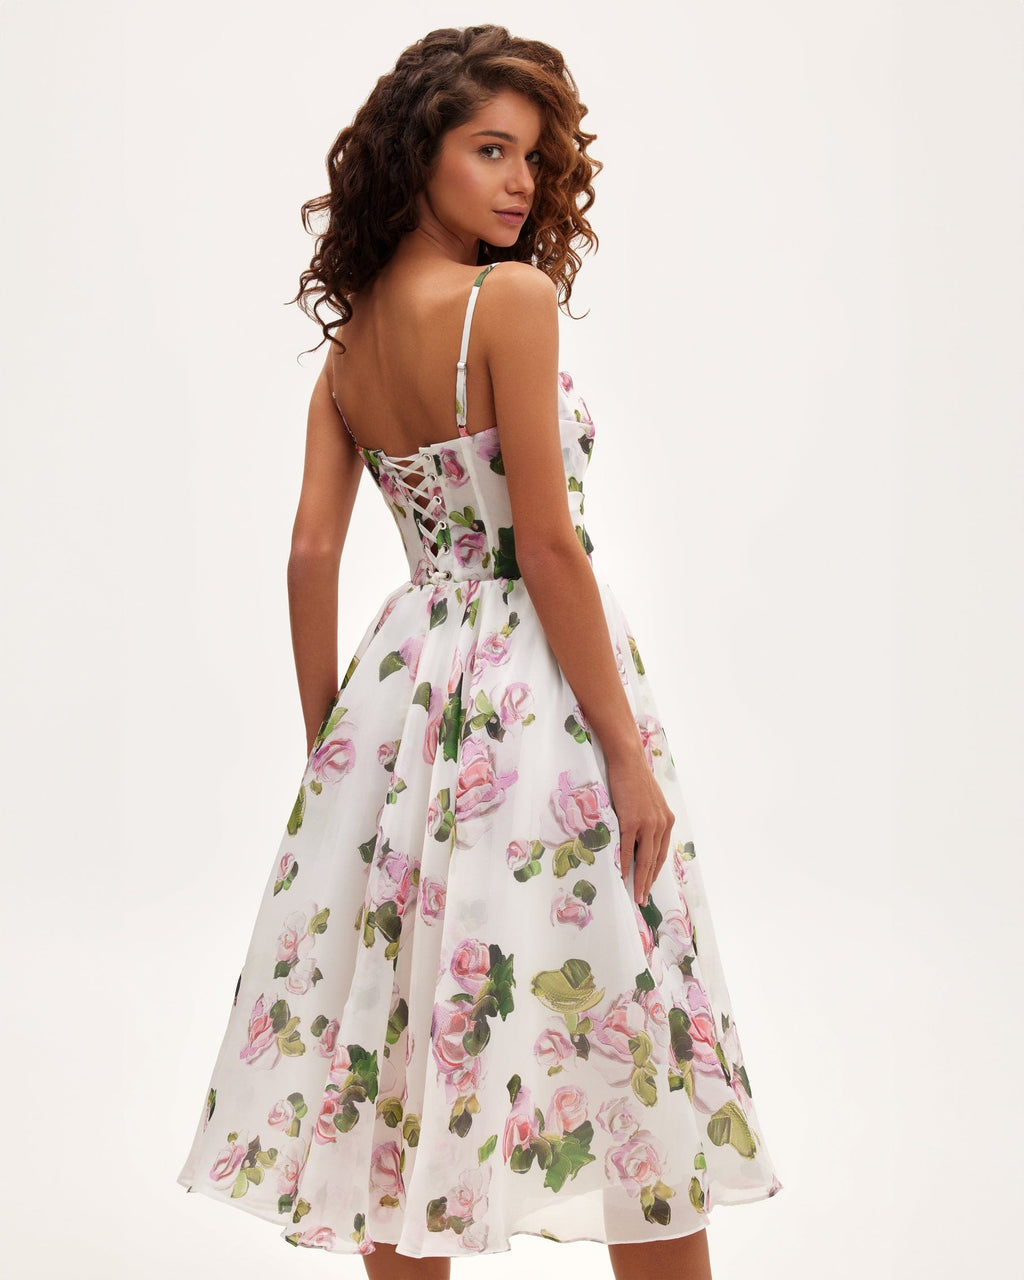 All Dresses ➤ Milla Dresses - USA, Worldwide delivery